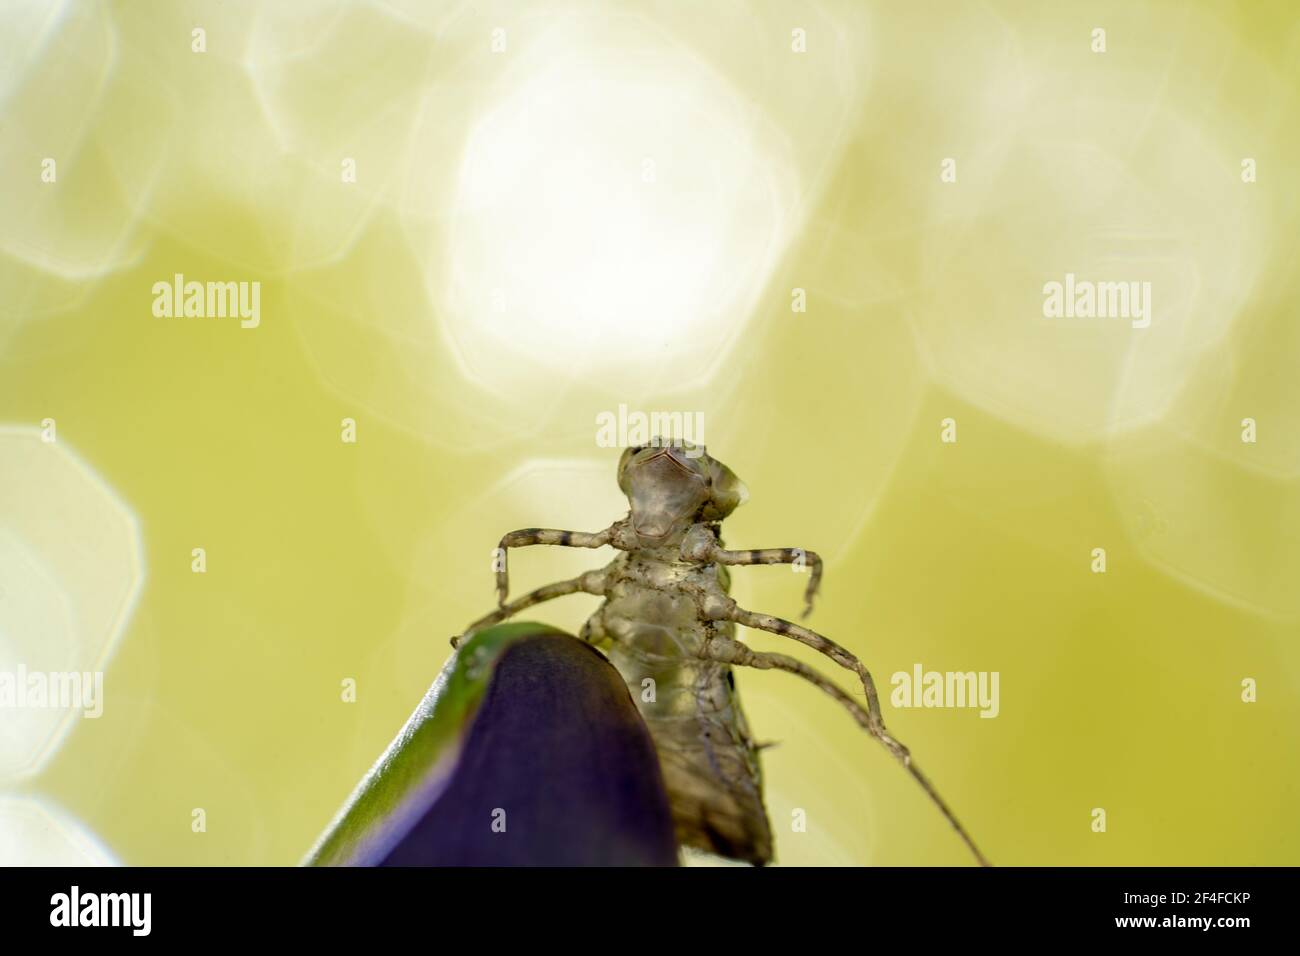 Shell of a six legged bug with alien looking skull Stock Photo